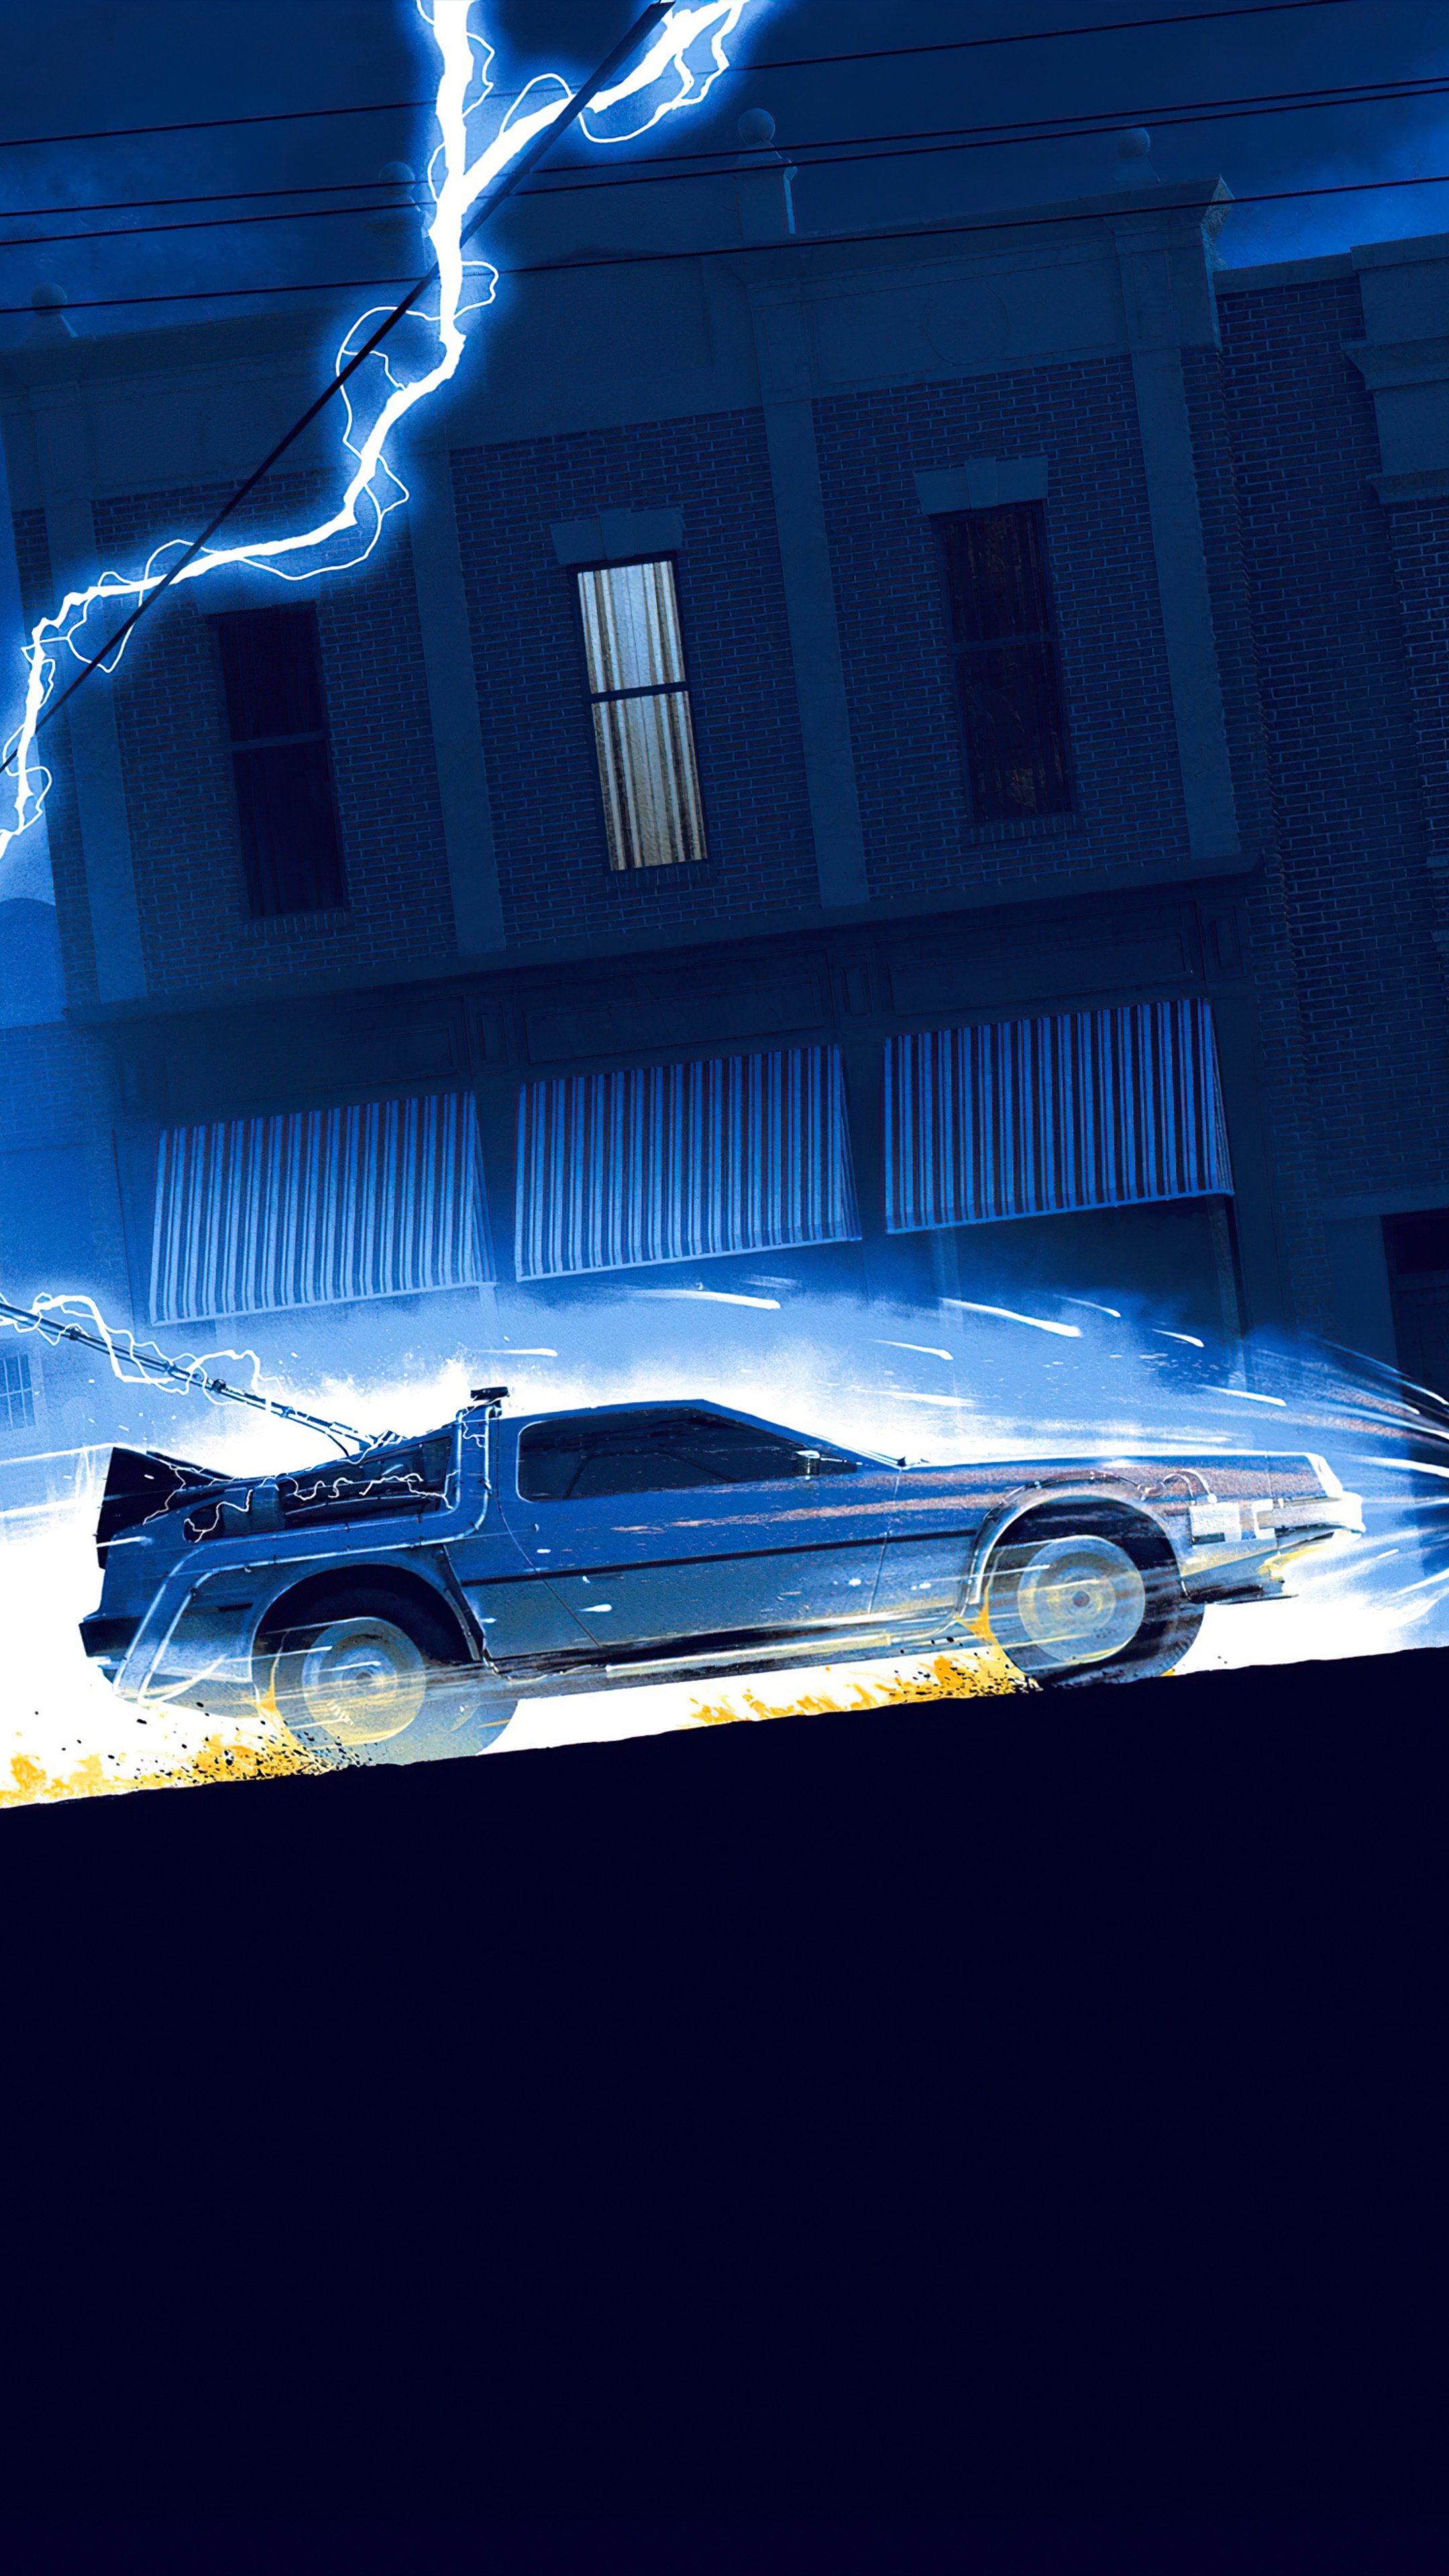 back to the future, movies, hd, 4k, poster Gallery HD Wallpaper